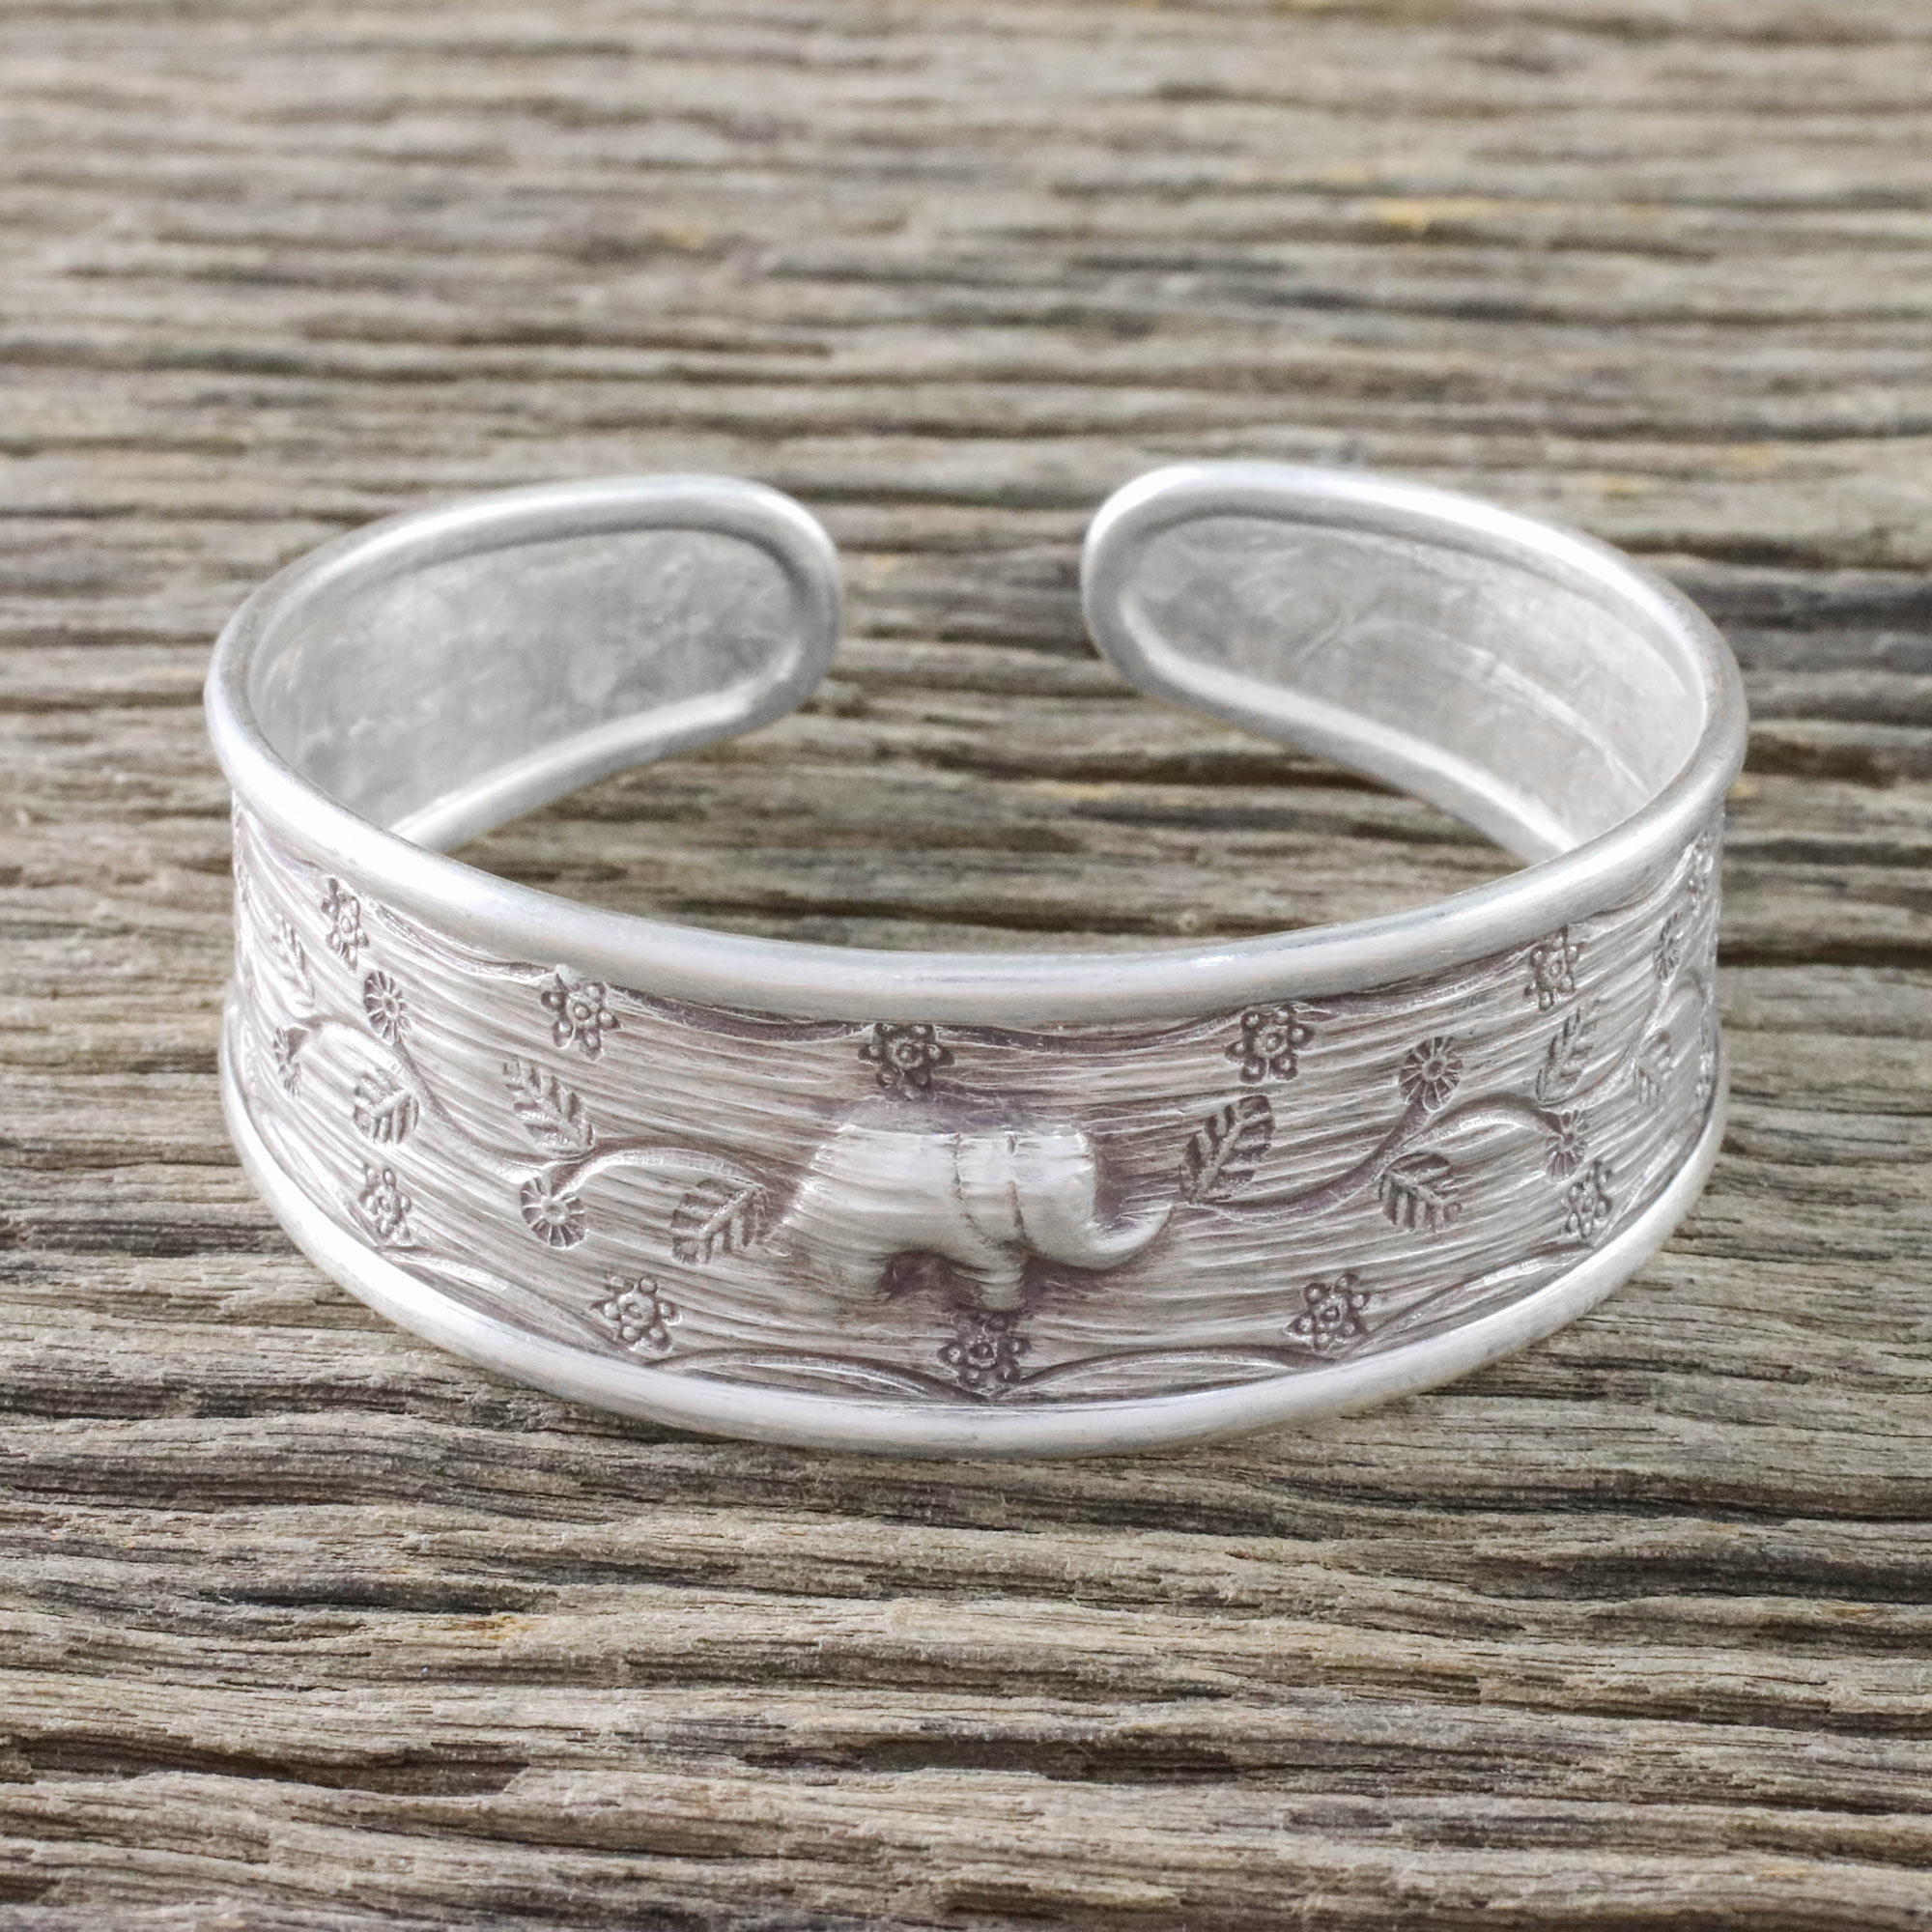 Handcrafted Sterling Silver Elephant Cuff Bracelet - Exotic Elephant ...